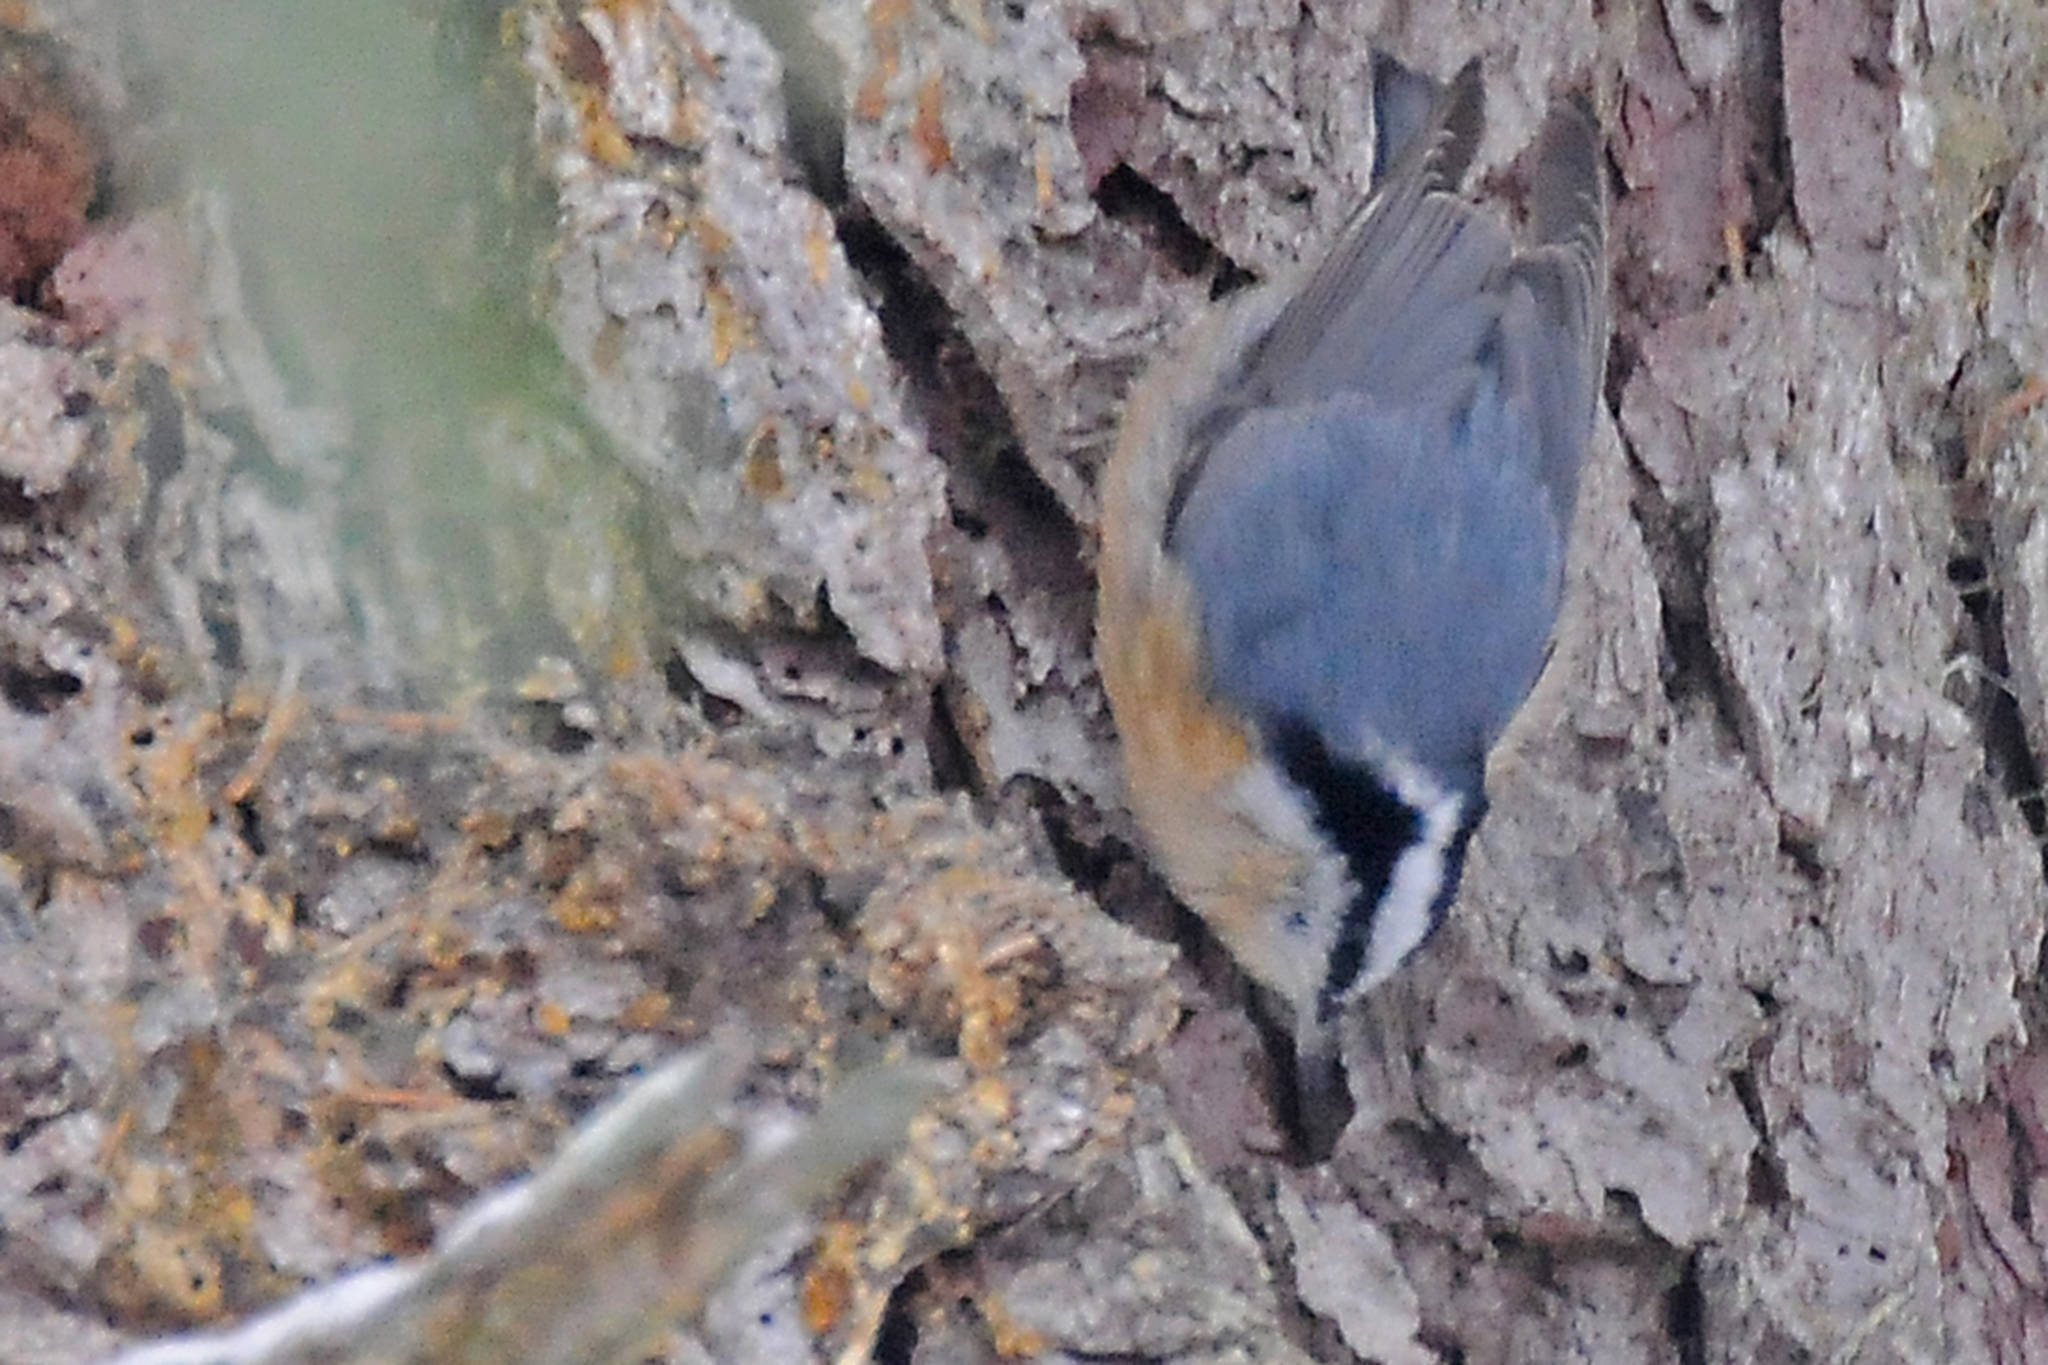 Red-breasted nuthatches can walk head-first down a tree trunk and even walk upside down underneath a branch. (Courtesy Photo / Bob Armstrong)